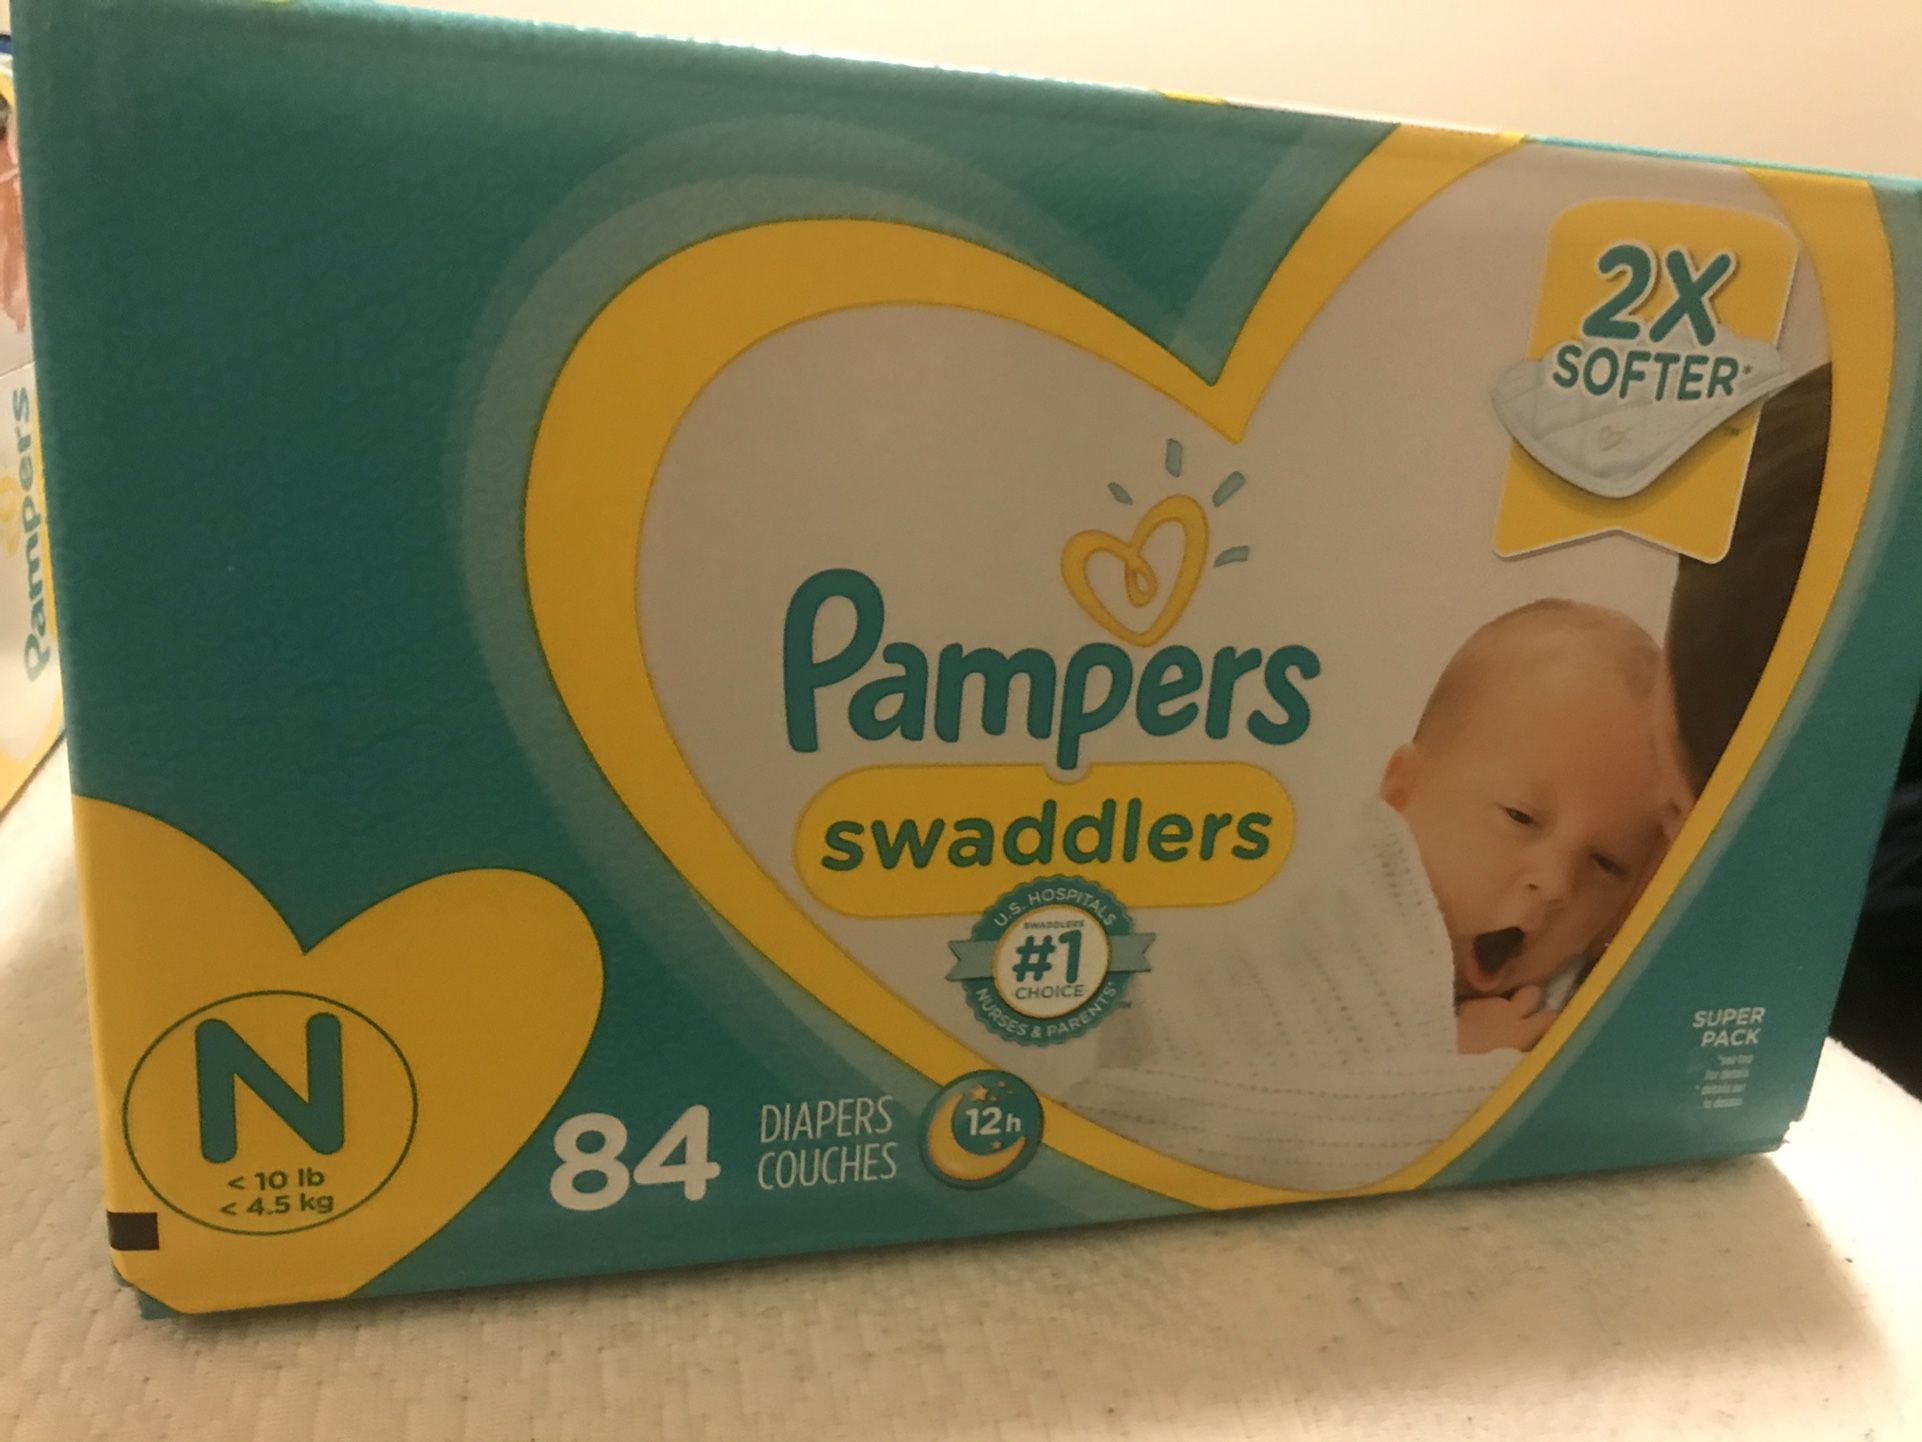 Newborn diapers (Pampers)